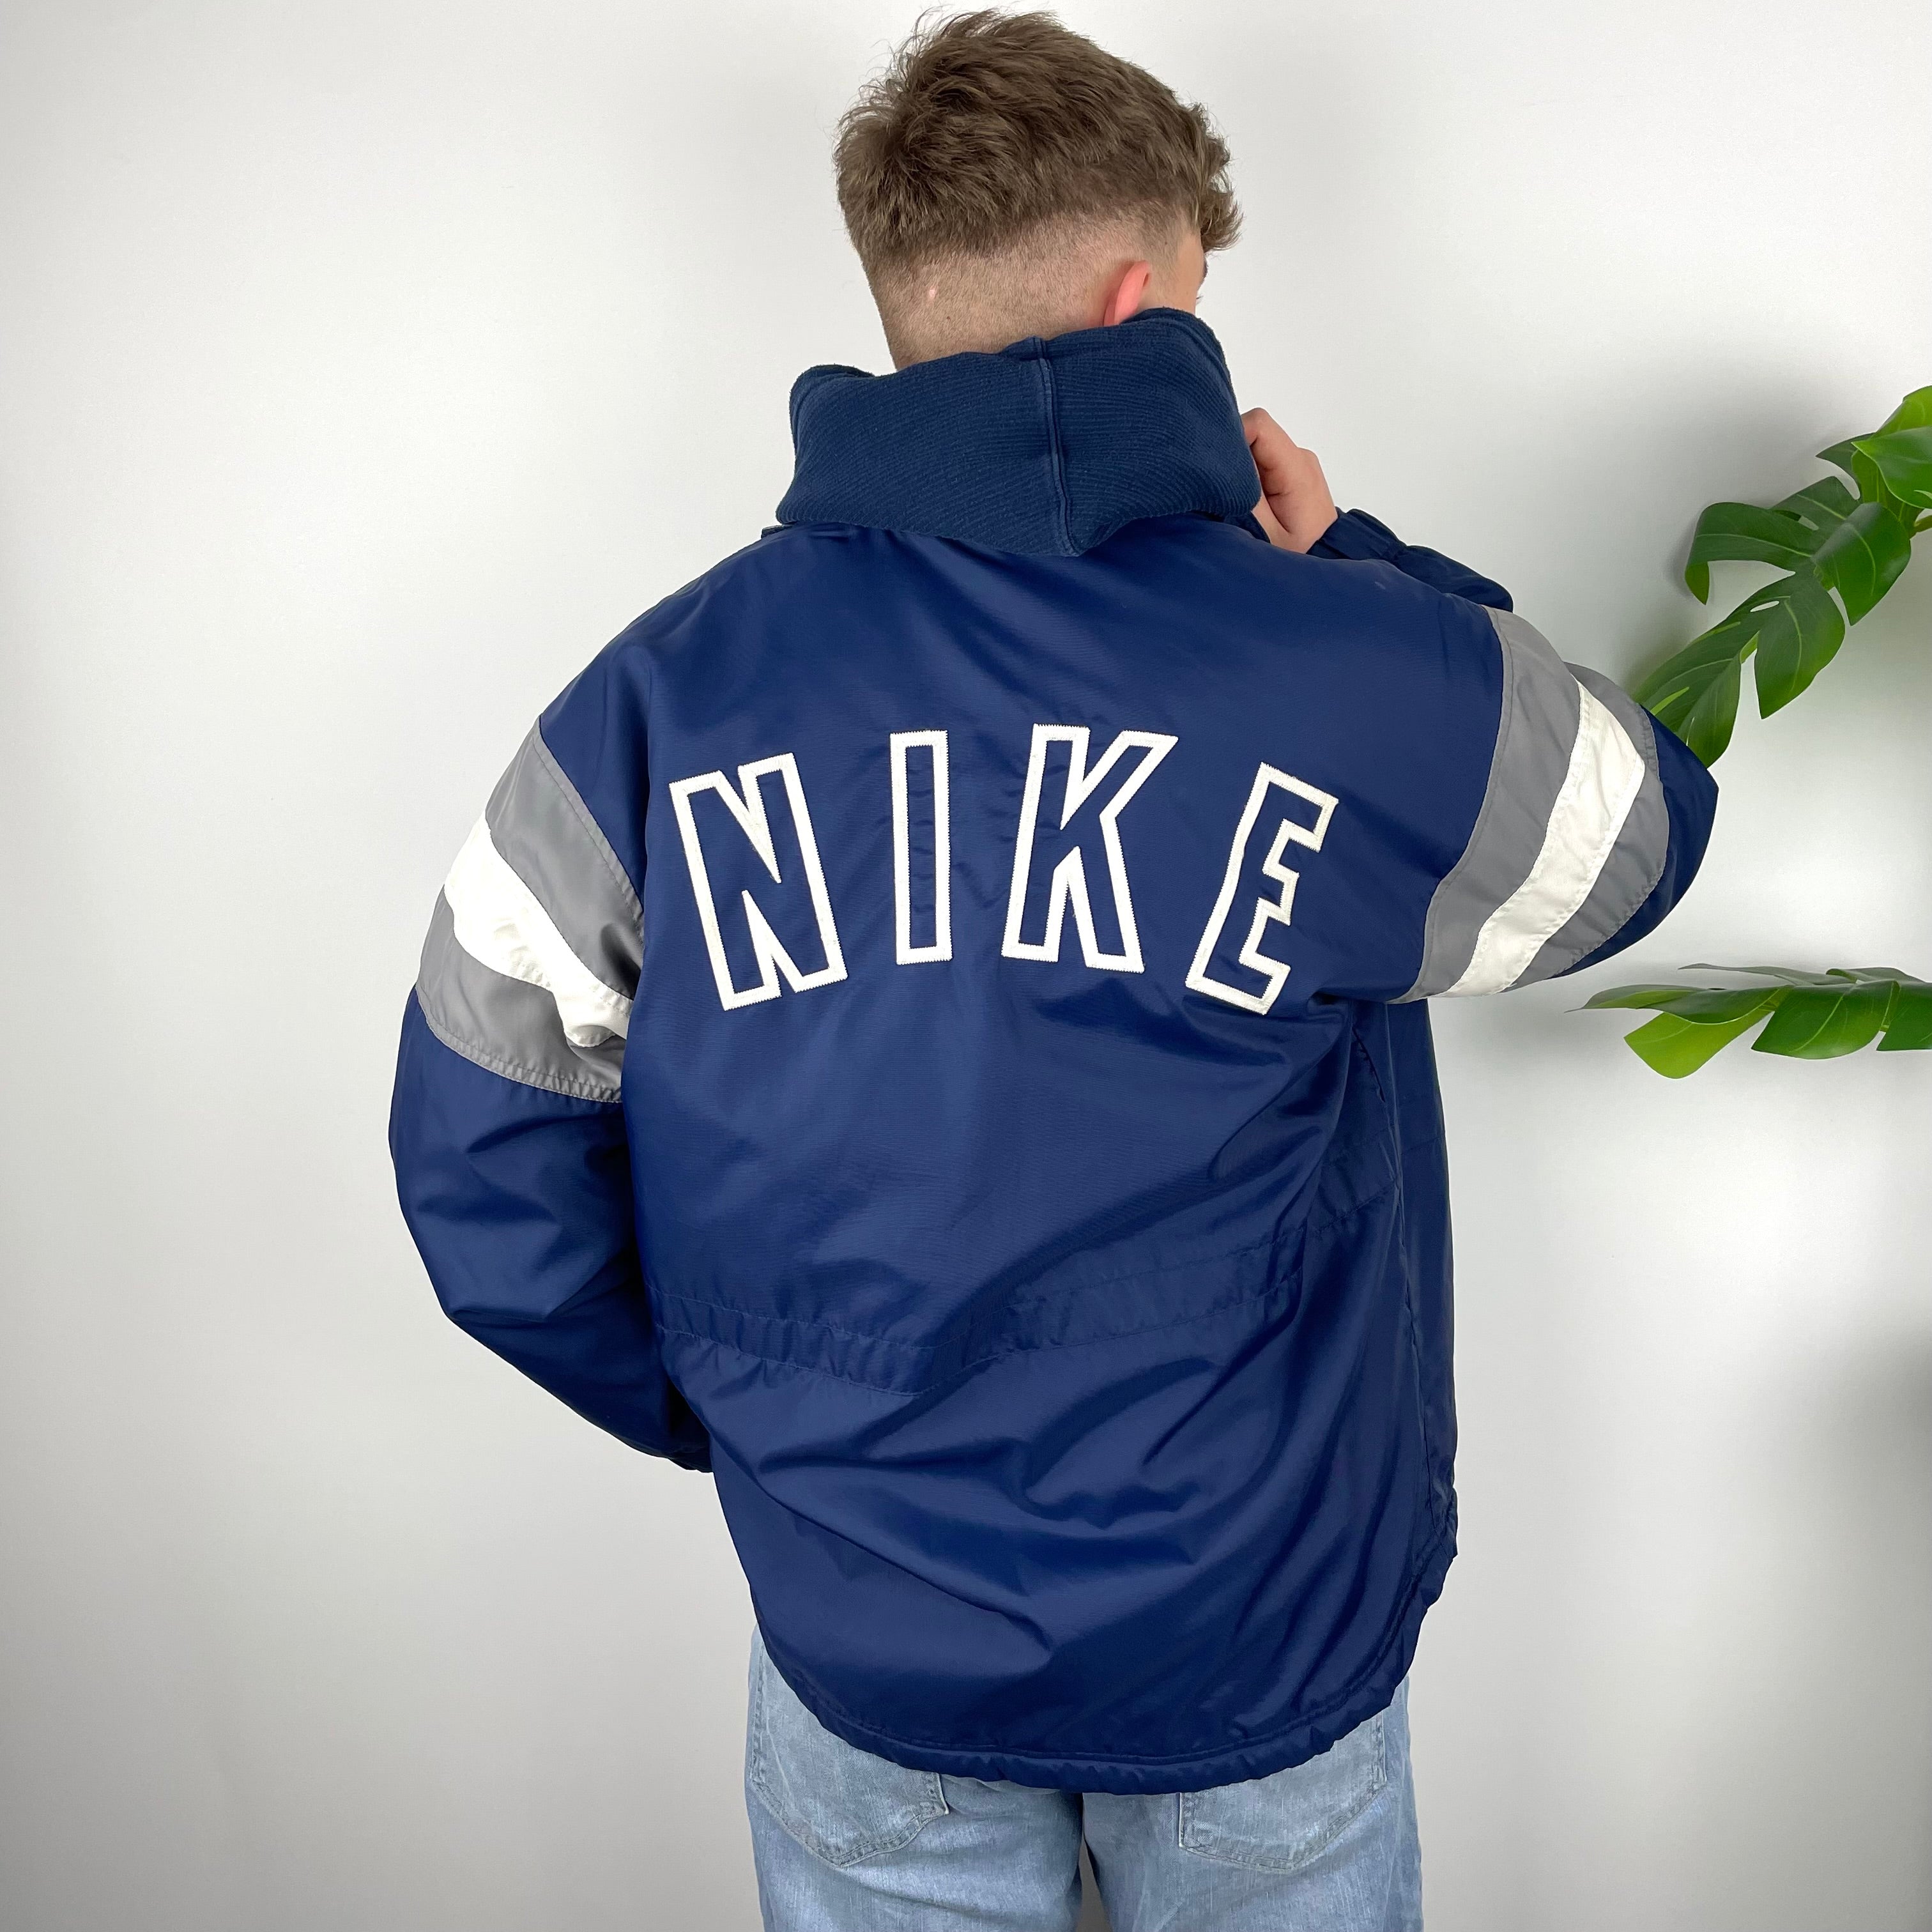 Nike RARE Navy Embroidered Spell Out Padded Jacket (M)